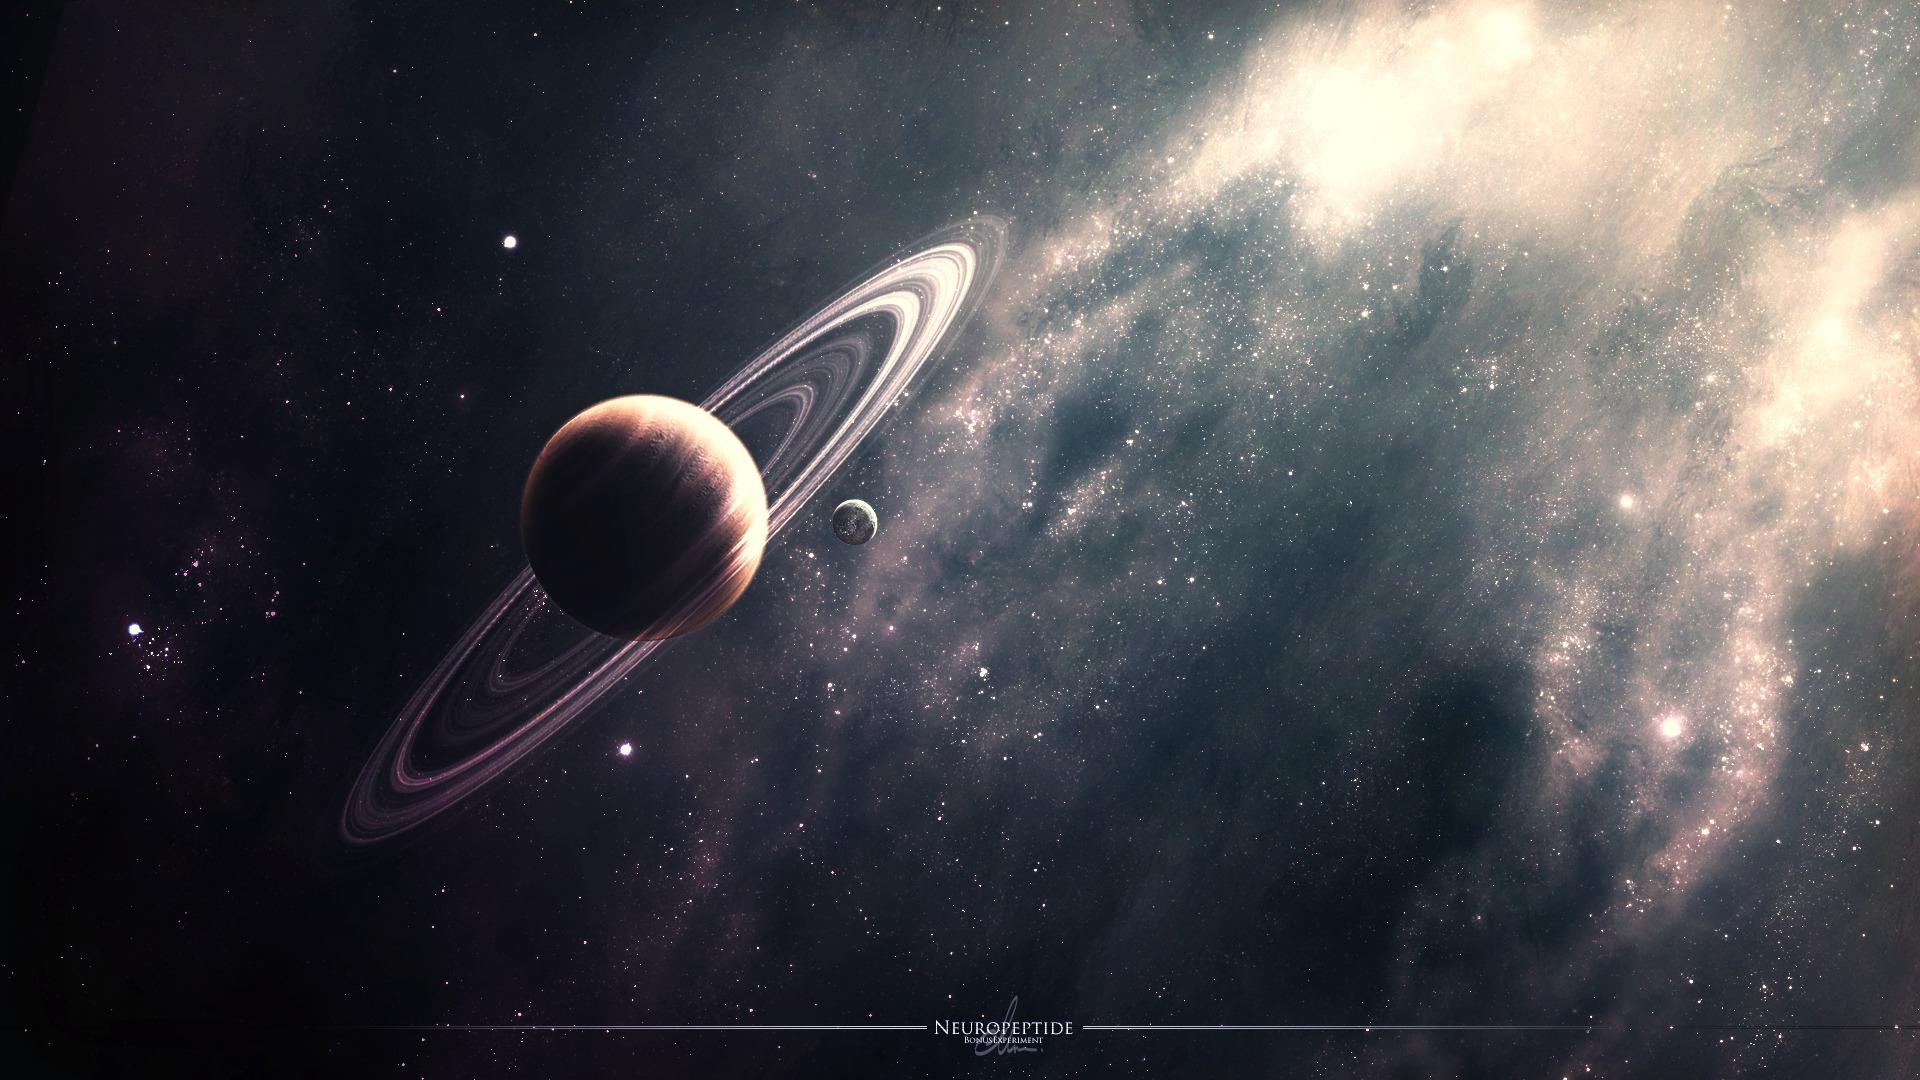 Saturn pocket pc, pda wallpapers hd, desktop backgrounds 800x600, images  and pictures